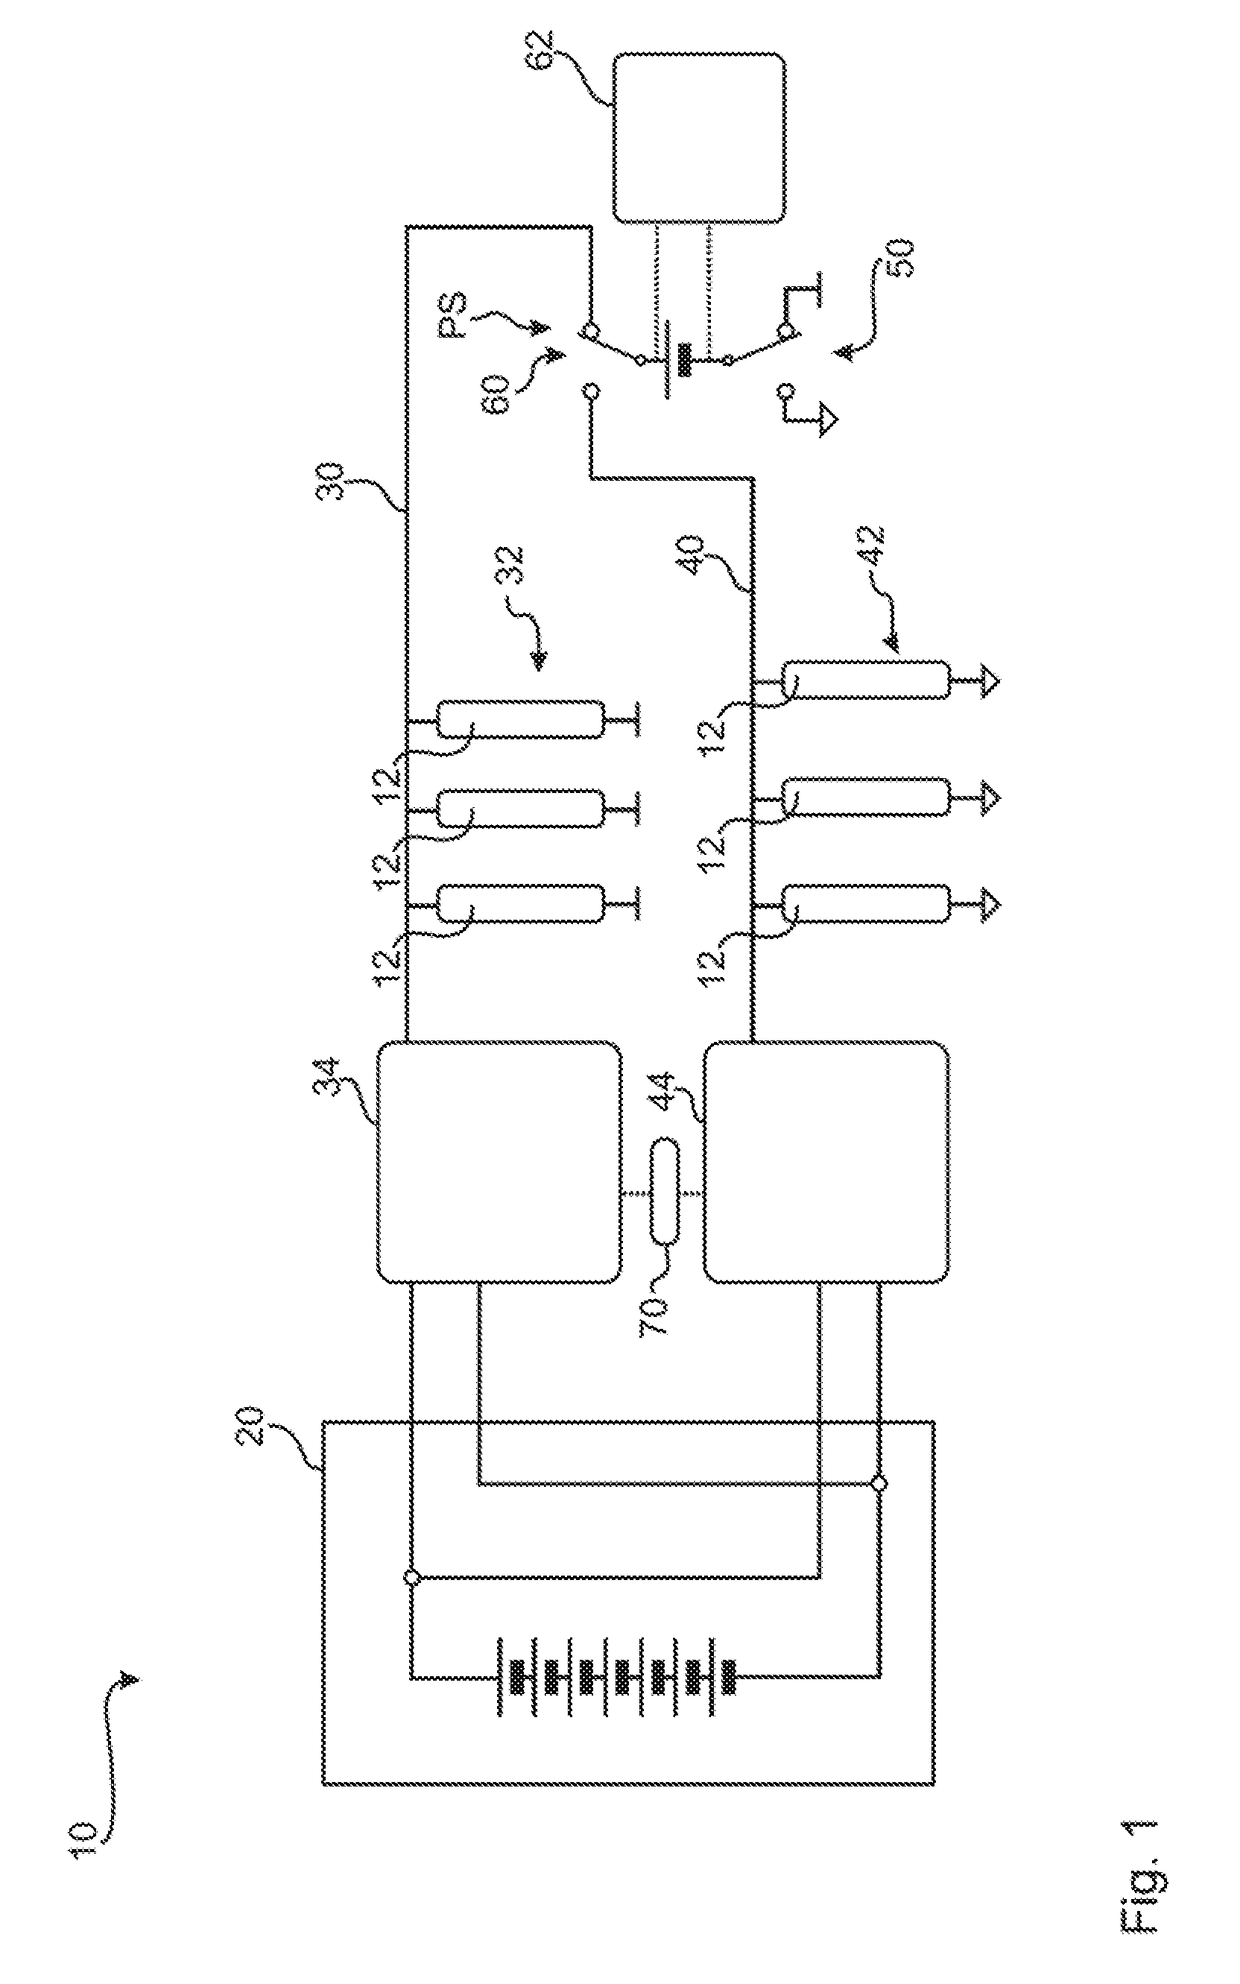 Vehicle electrical system arrangement for a motor vehicle